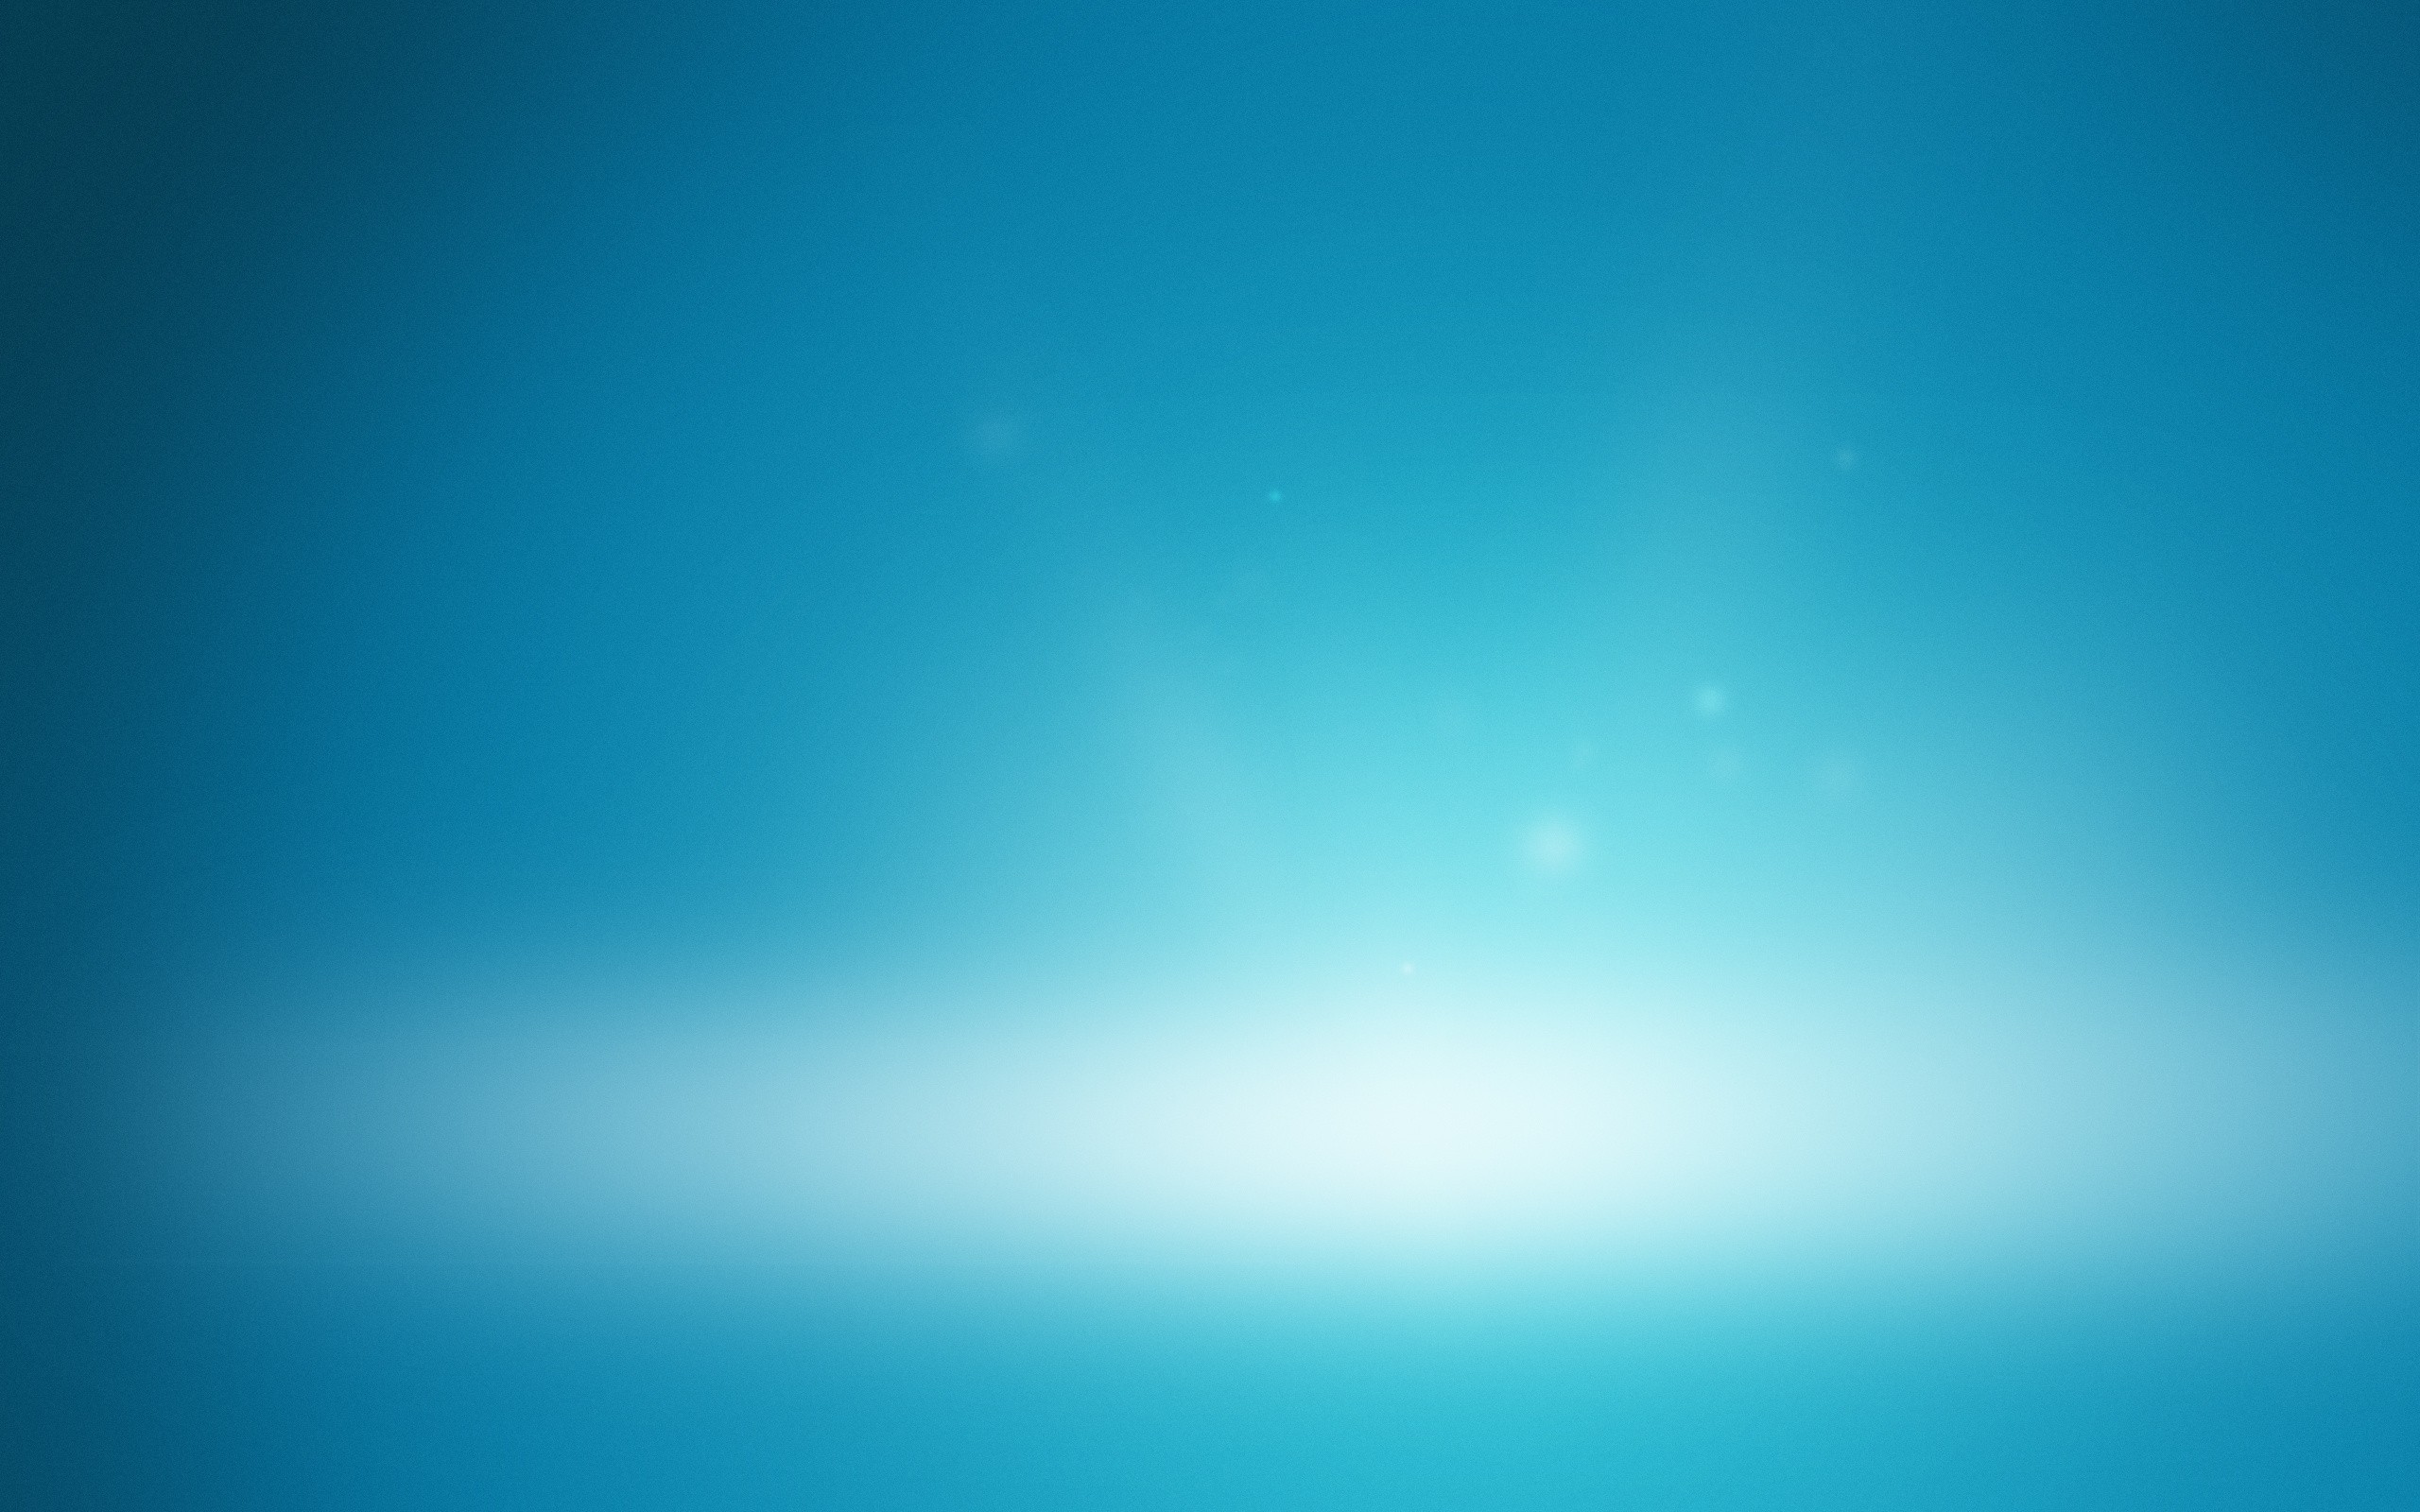 General 2560x1600 abstract blue gradient simple background digital art